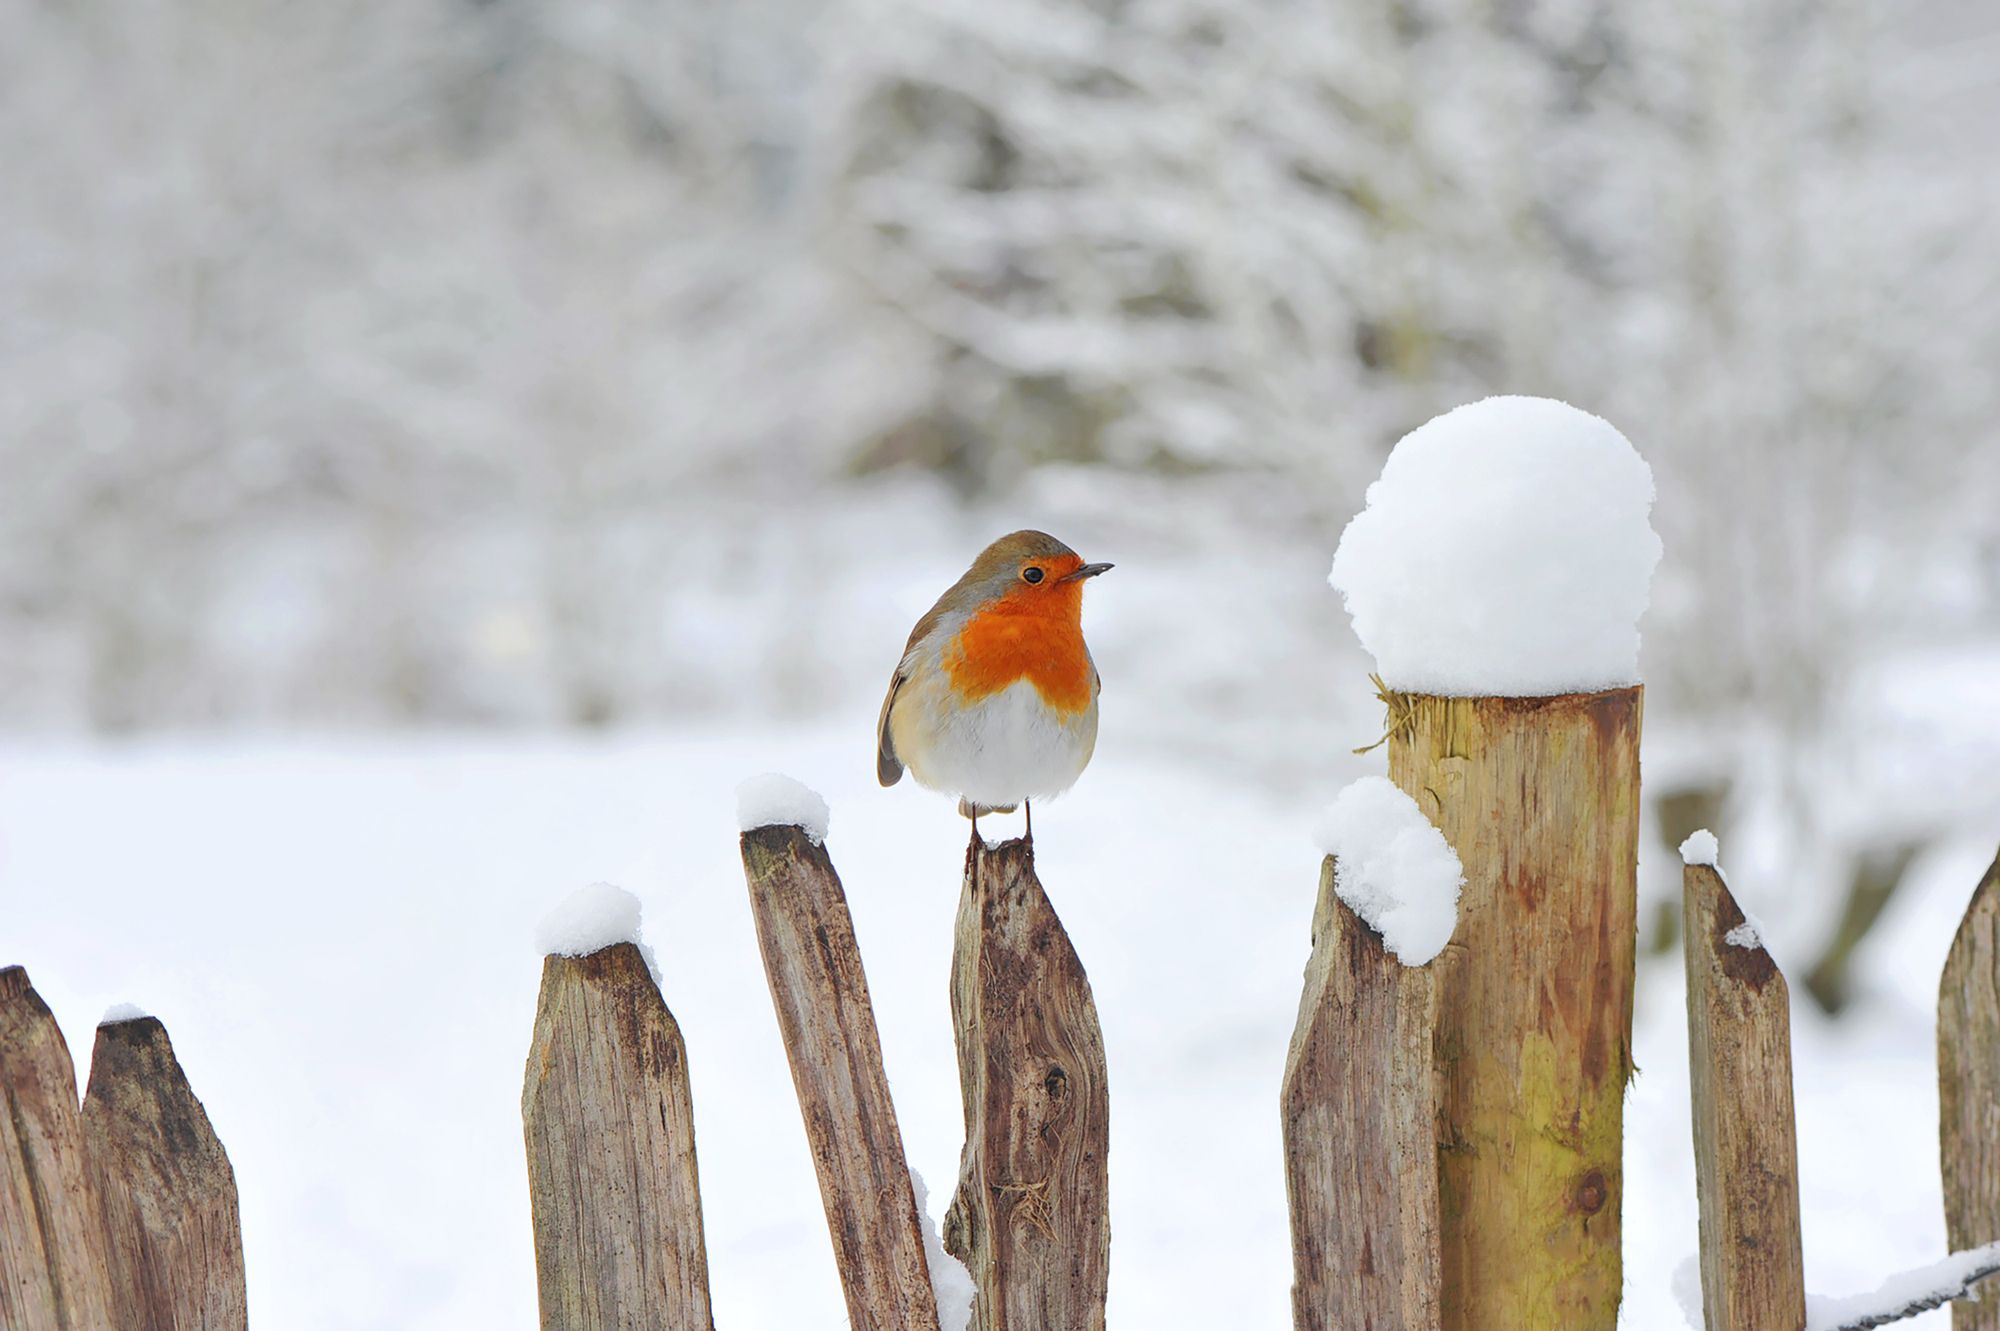 15 Beautiful Photographs Of Animals In Snow